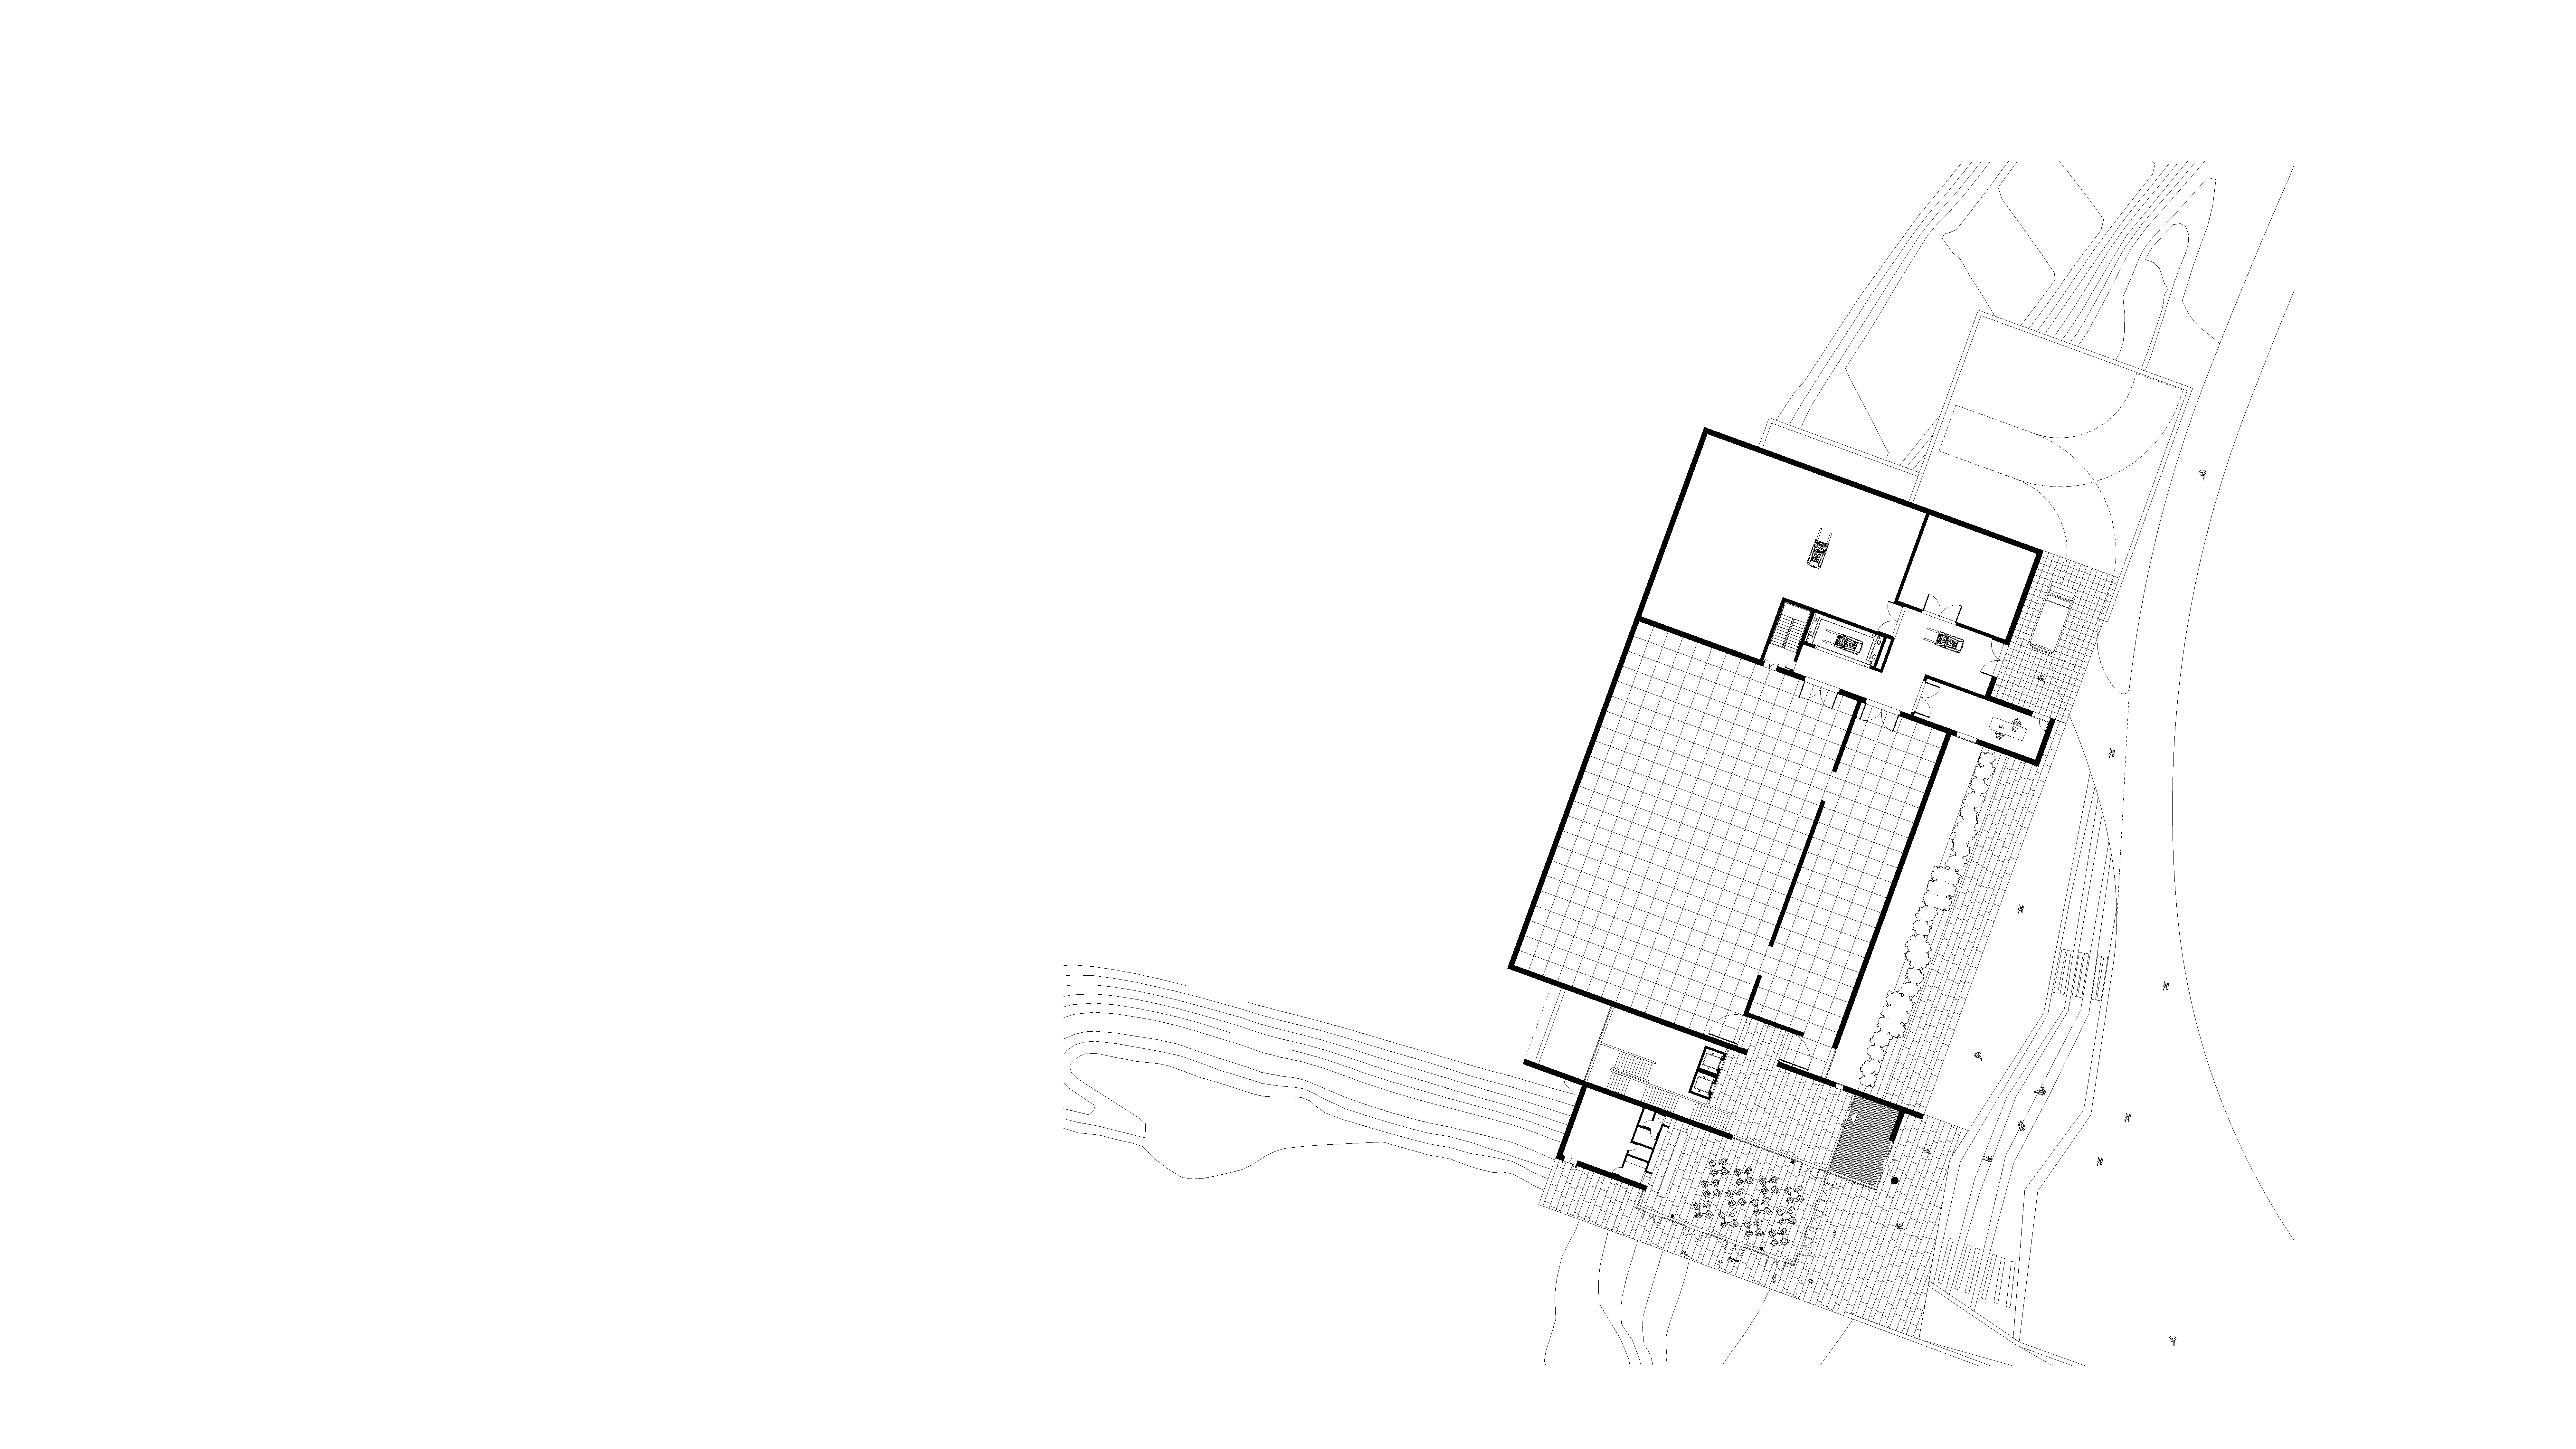 First floor plan of new museum by Keith Williams Architects for lwl-freilichtmuseum Detmold invited competition